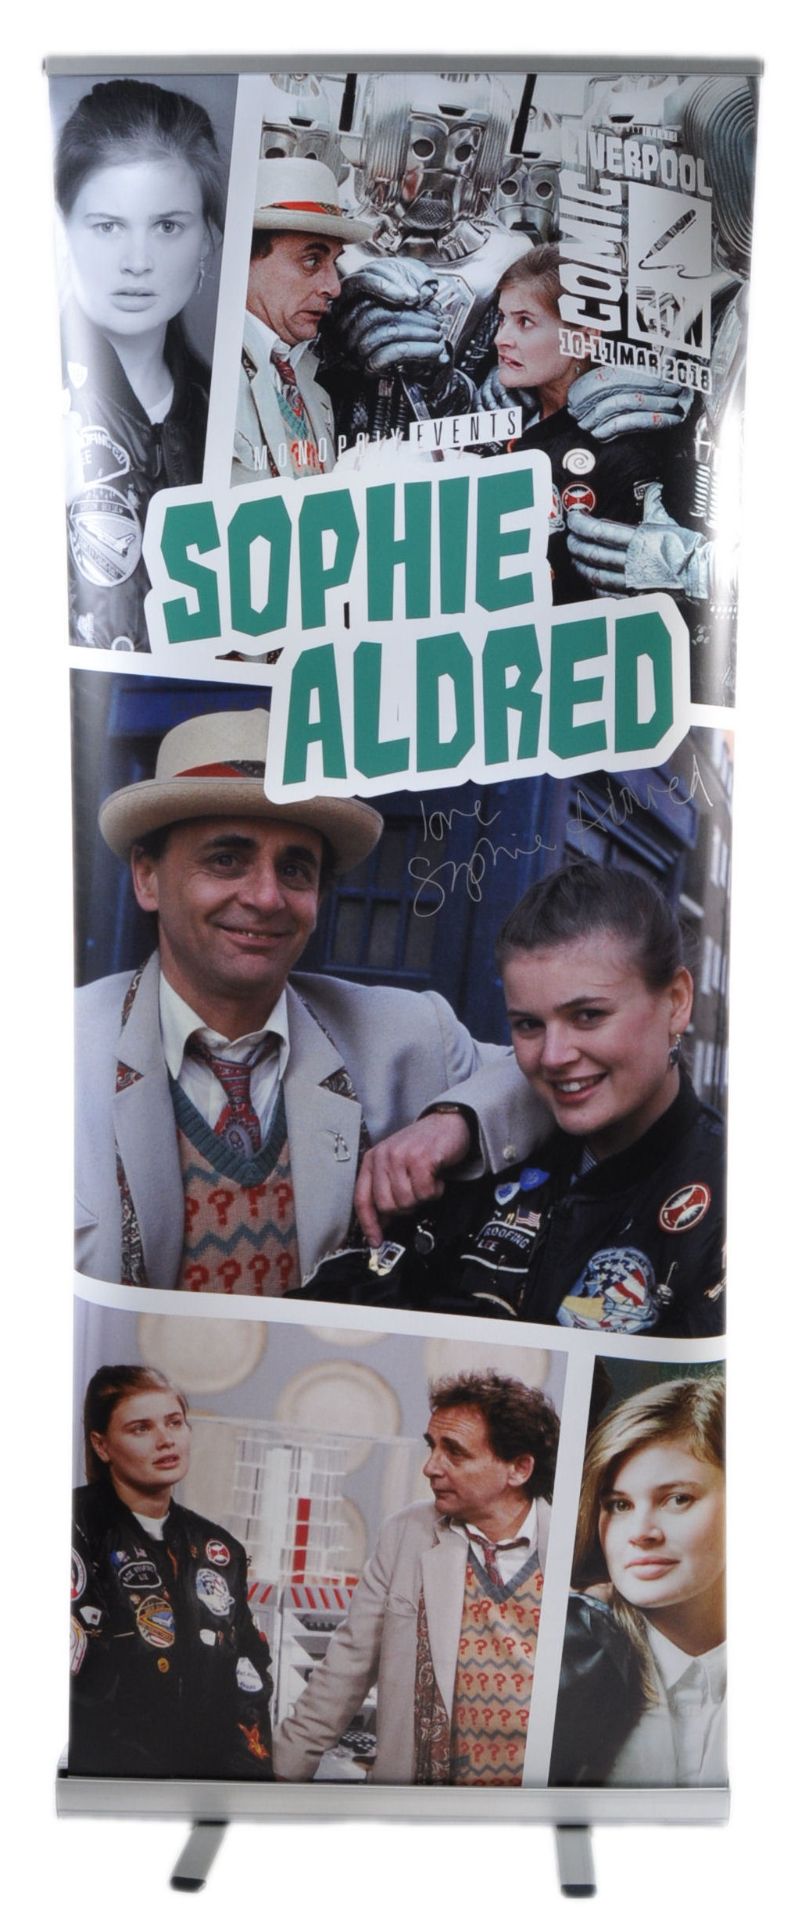 MONOPOLY EVENTS - AUTOGRAPHED BANNER - SOPHIE ALDRED